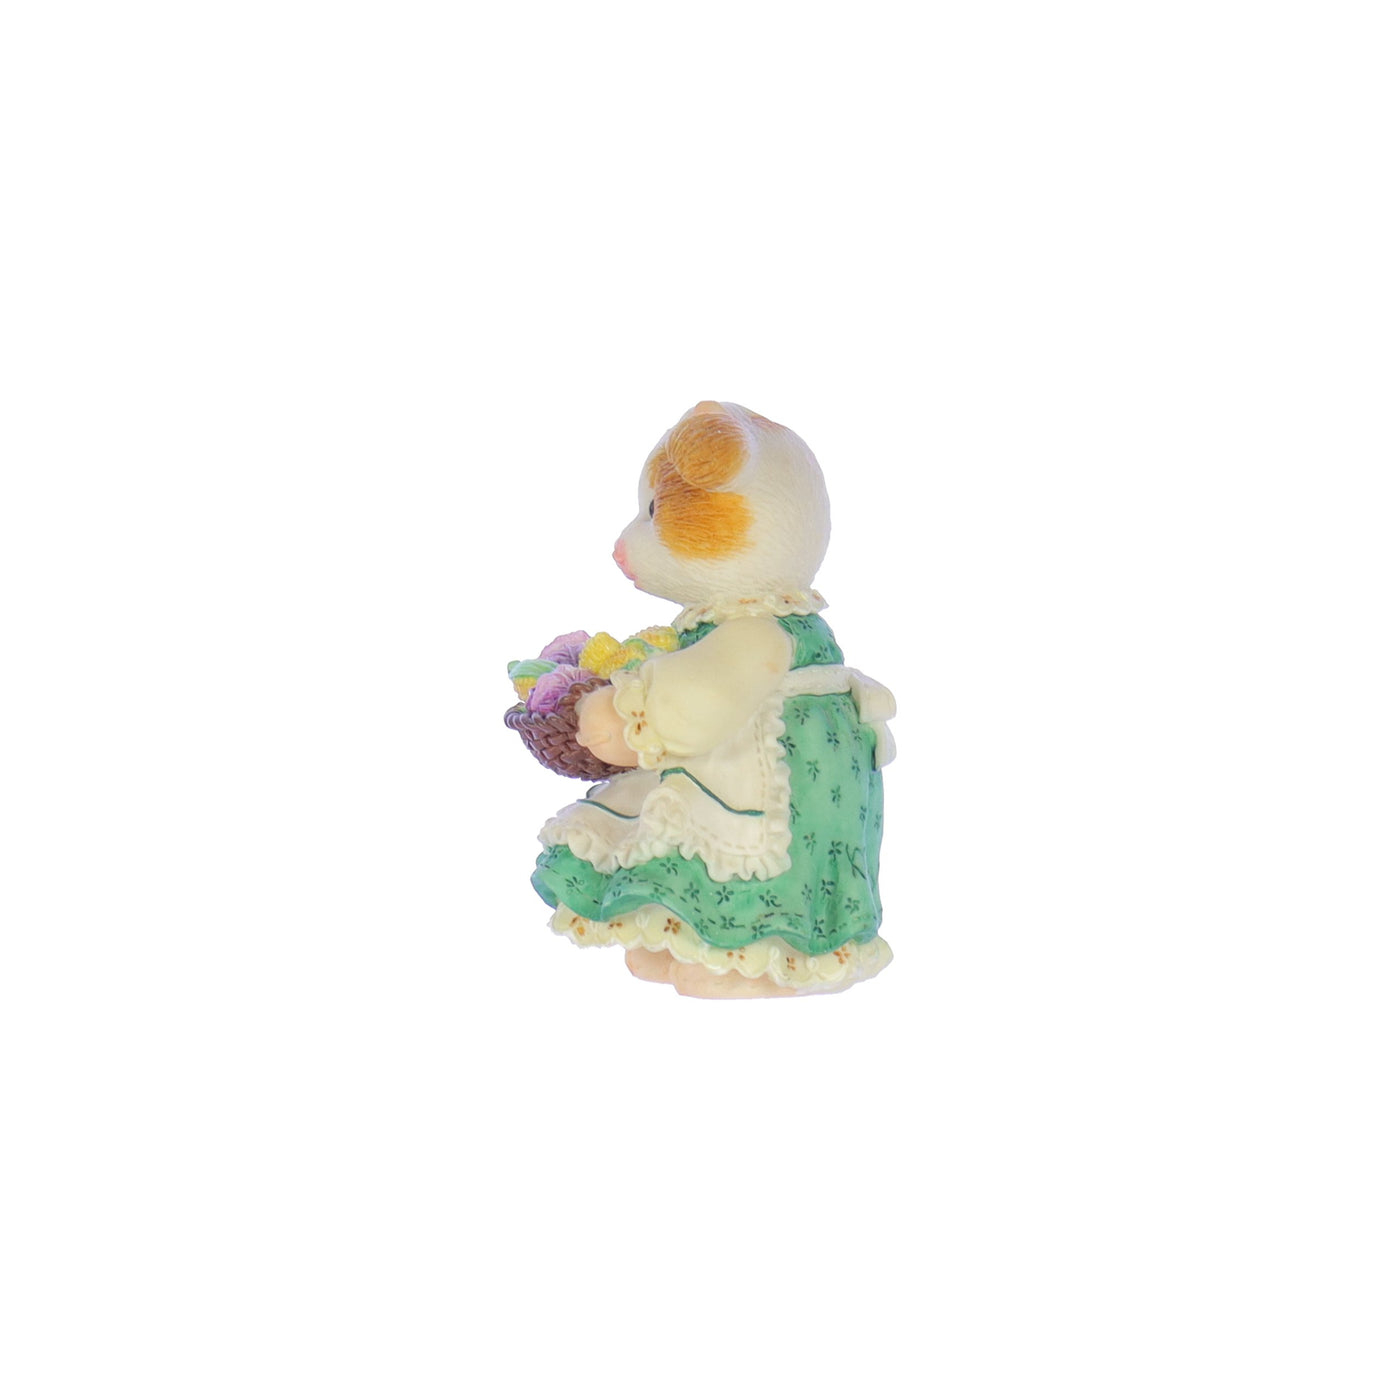 Marys-Moo-Moos-by-Mary-Rhyner-Nadig-Resin-Figurine-March-Corn,-Beef-and-Cabbage-257478